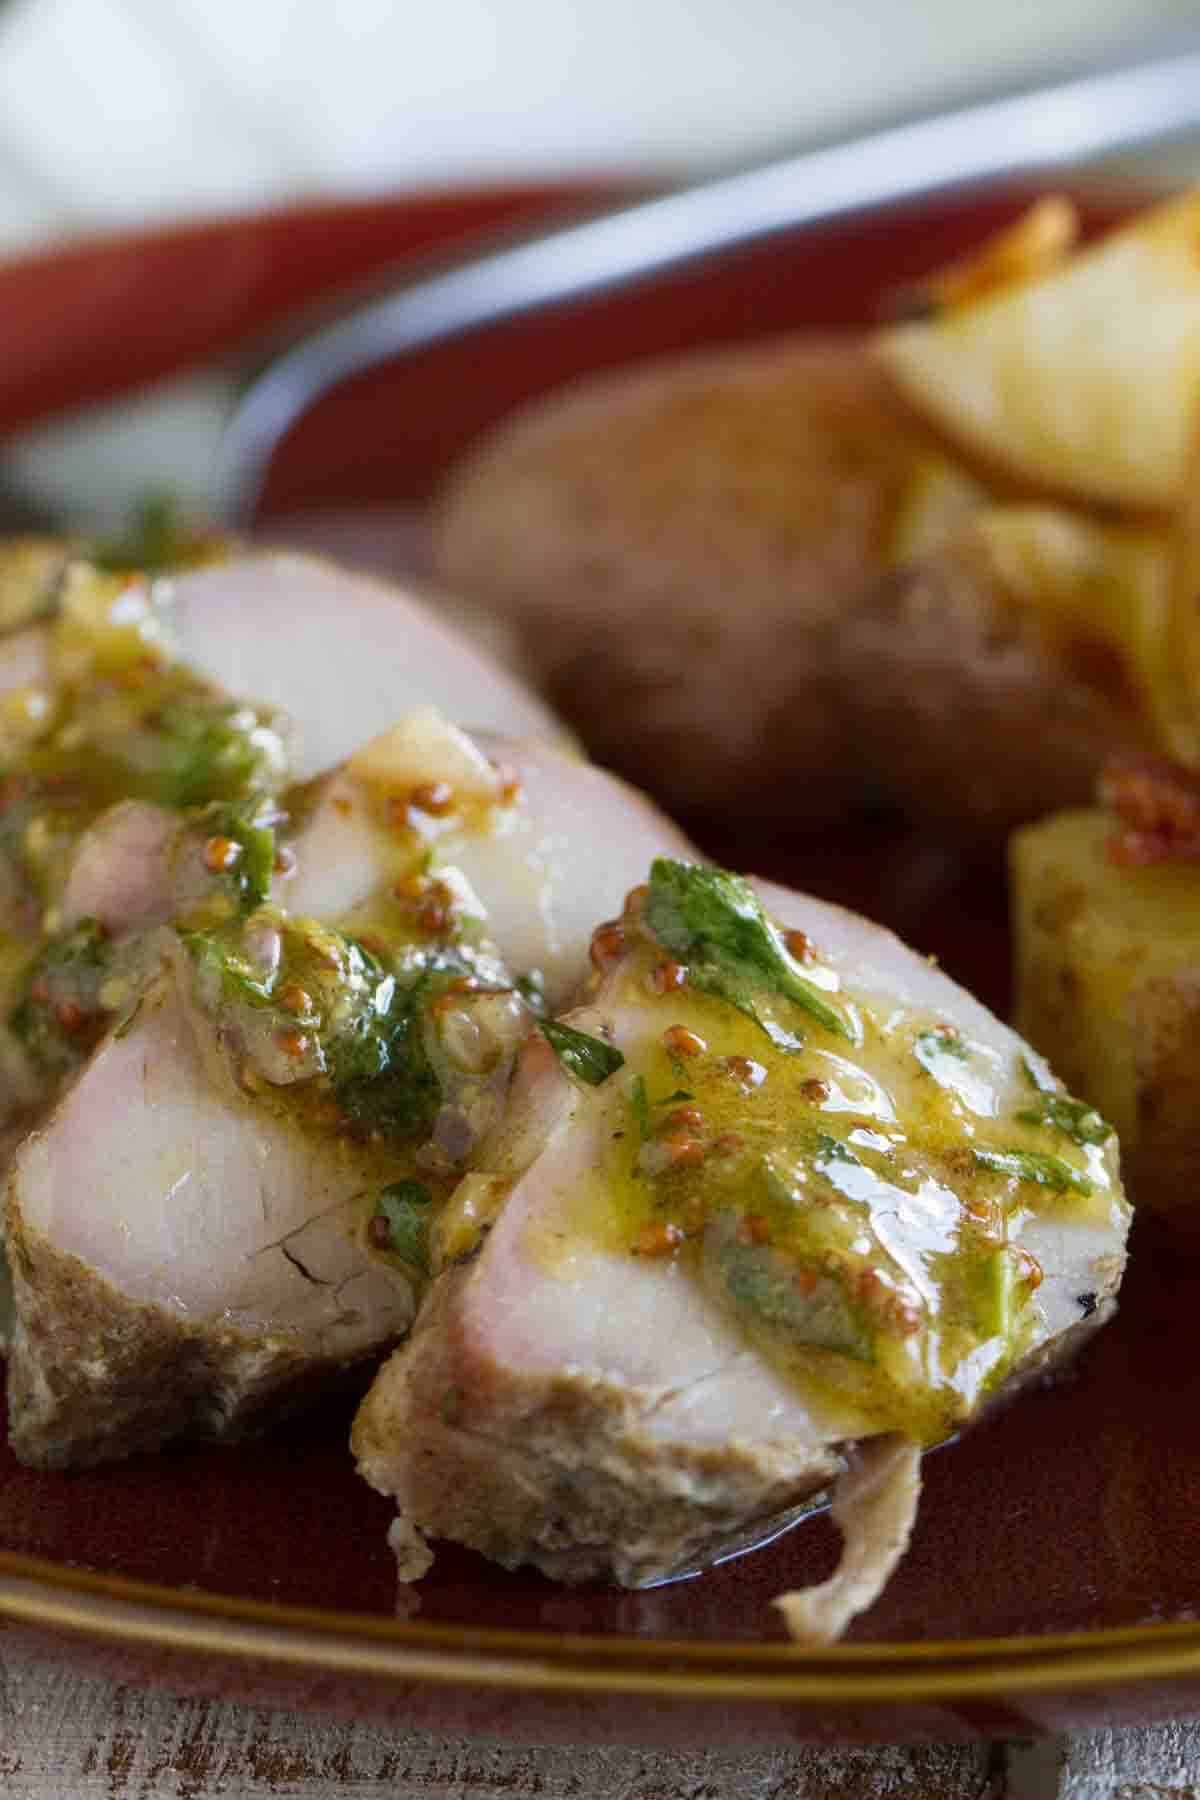 Slices of roast pork tenderloin topped with a mustard sauce.